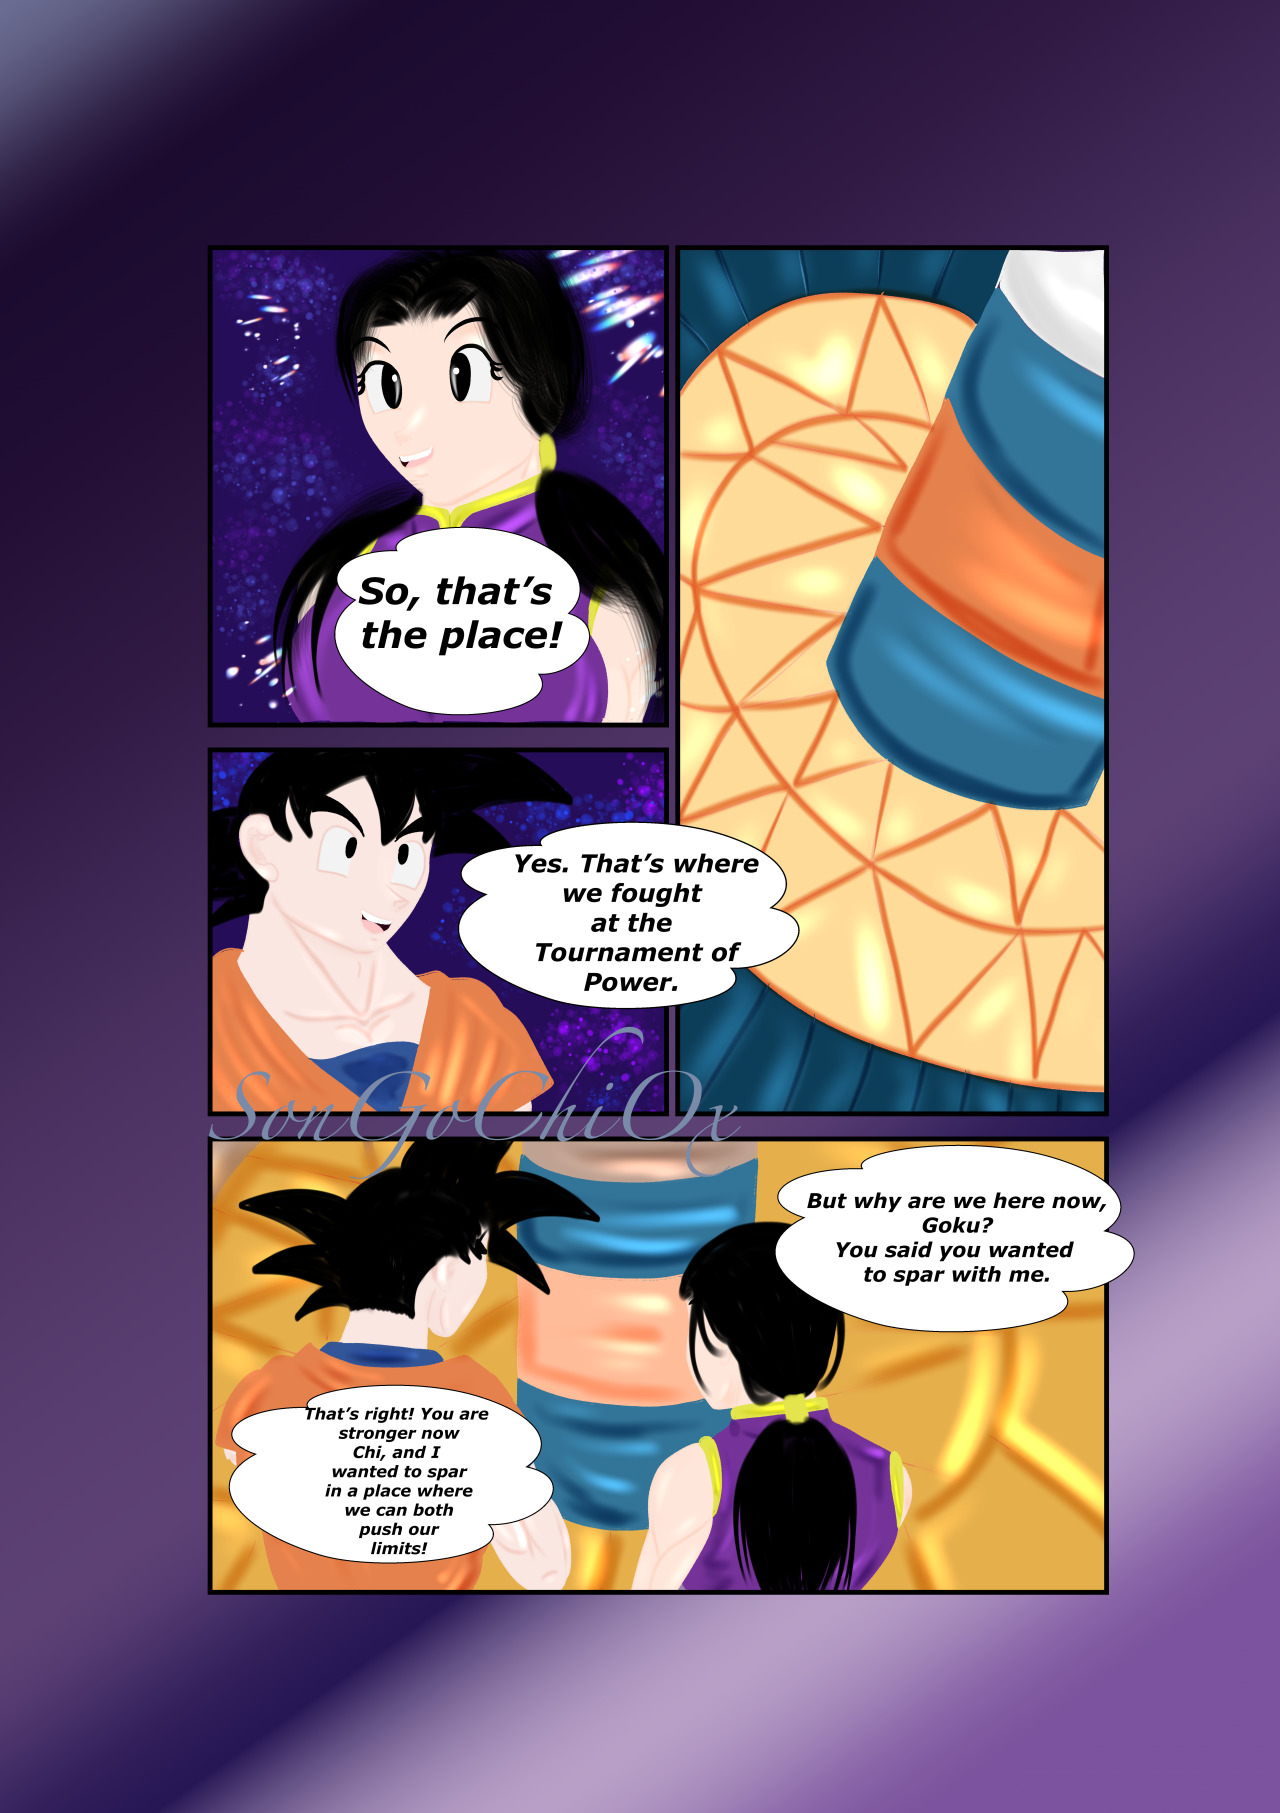 How a sparring session on the Tournament of Power ground ended with two sweaty bodies entangled? Intro to the steamy series on my twitter account @naughty_go  #Goku ChiChi GoChi Dragonball DragonballZ DragonballGT DragonballSuper DBSSuperHero #悟空#チチ#悟チチ#ドラゴンボール#ドラゴンボールZ#ドラゴンボールGT#ドラゴンボール超#ドラゴンボール超スーパーヒーロー